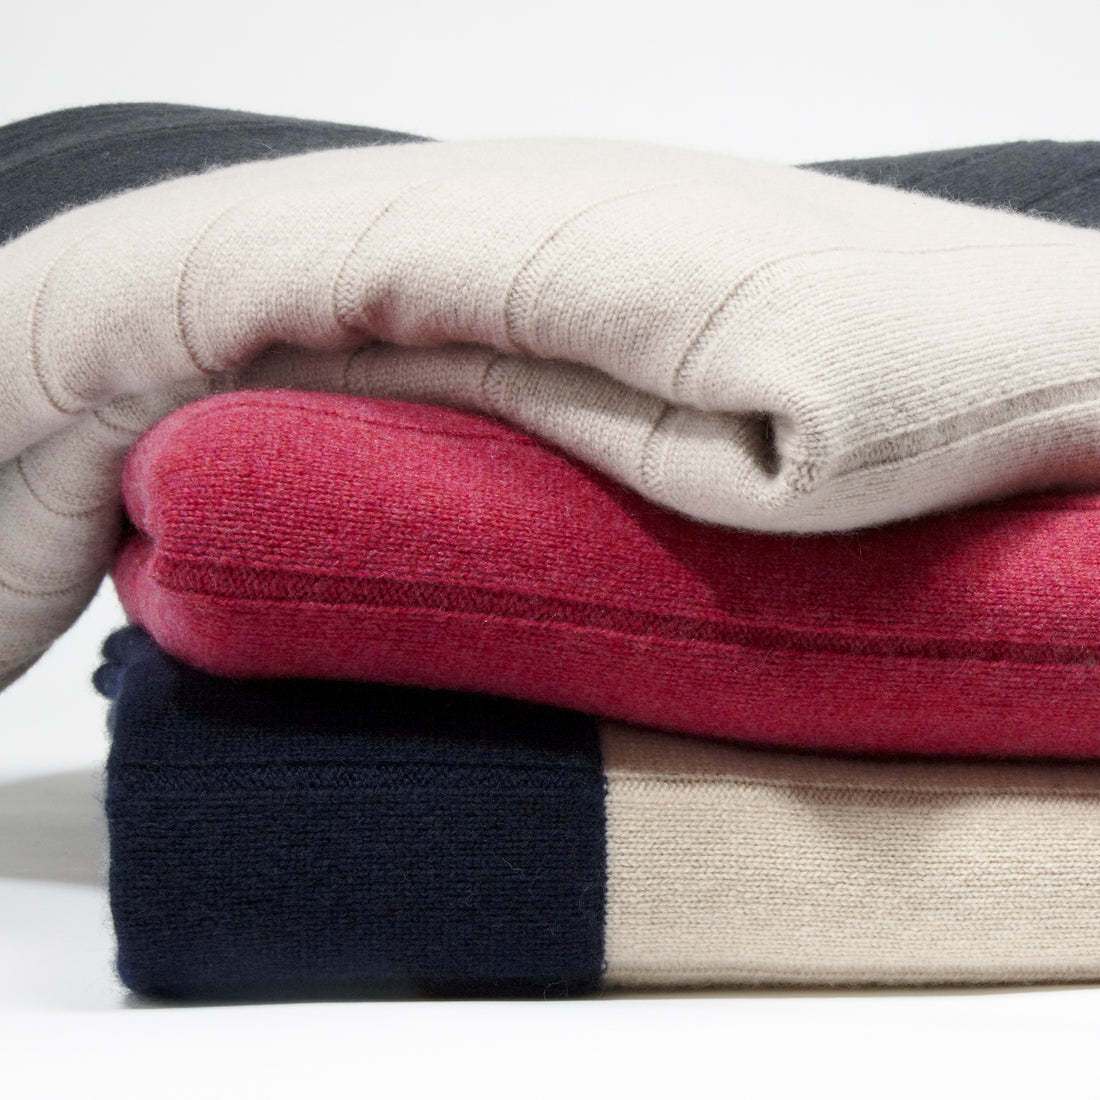 What makes our cashmere wool so soft?